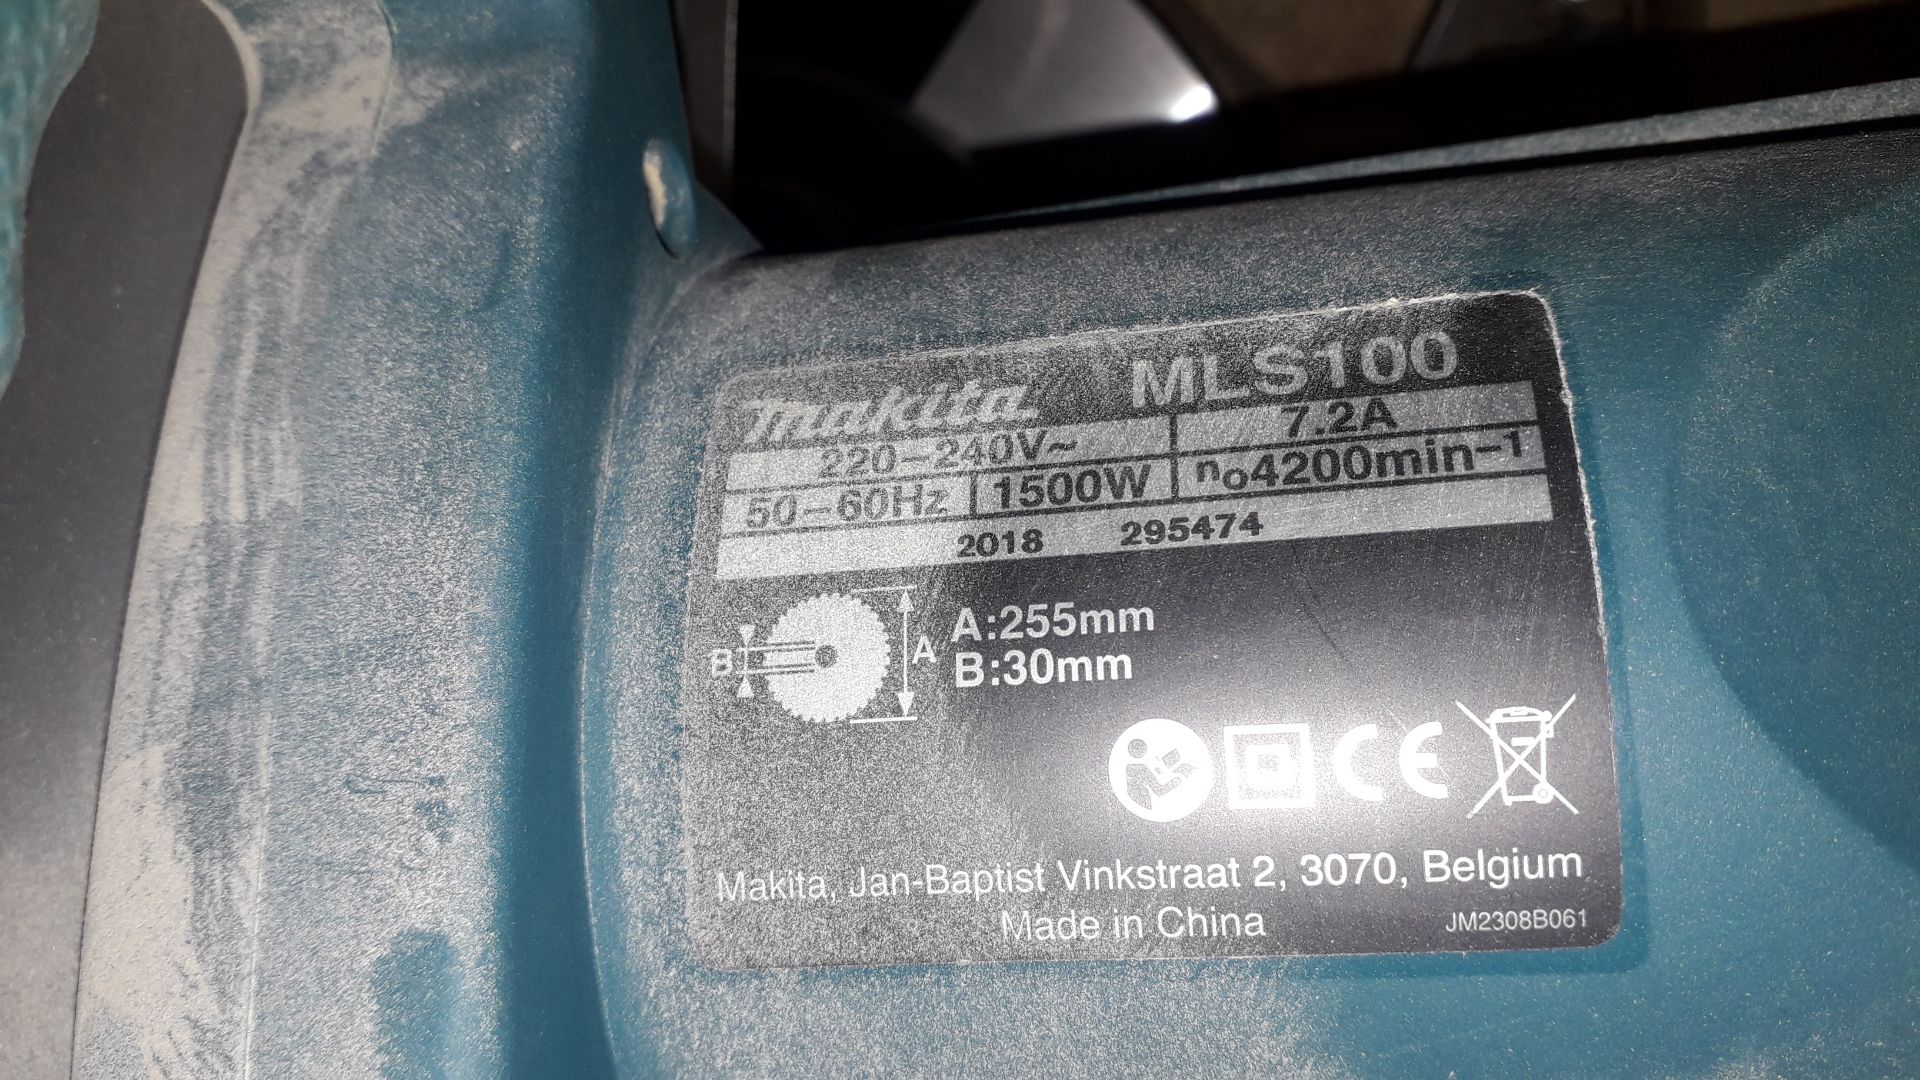 Makita MLS100 Compound Mitre Saw, (2018) S/N 295474 240v- Located on 1st Floor - Image 2 of 2